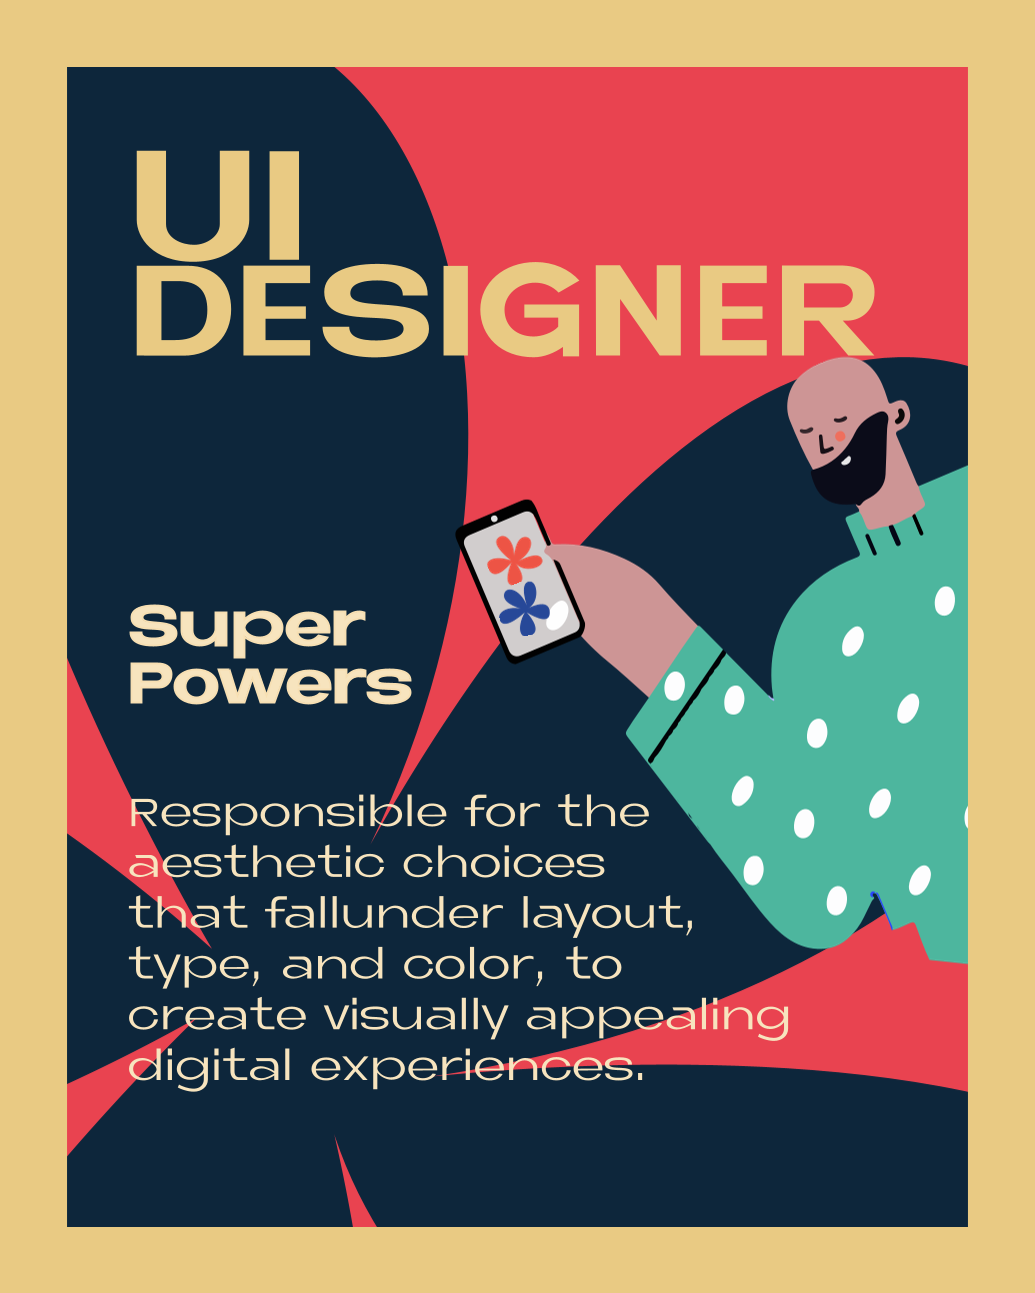 UI DESIGNER – Super Powers: Responsible for the aesthetic choices that fall under layout, type, and color, to create visually appealing digital experiences.
